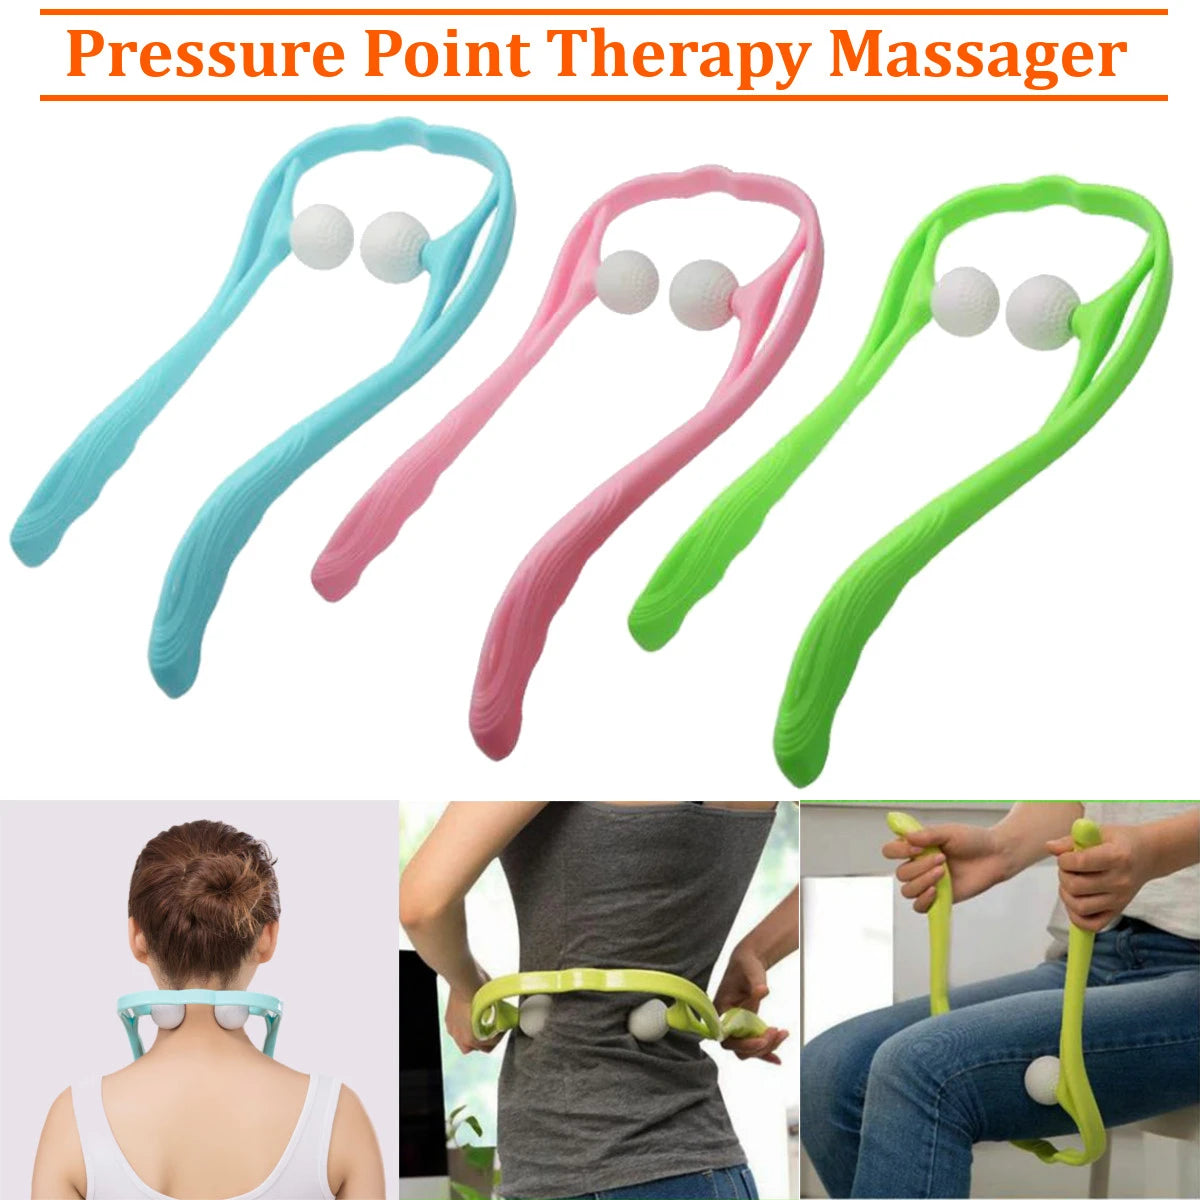 Plastic Pressure Point Therapy Neck Massage Comfortable 3 Colors Neck Massager for Neck Shoulder Trigger Point Self-massage Tool